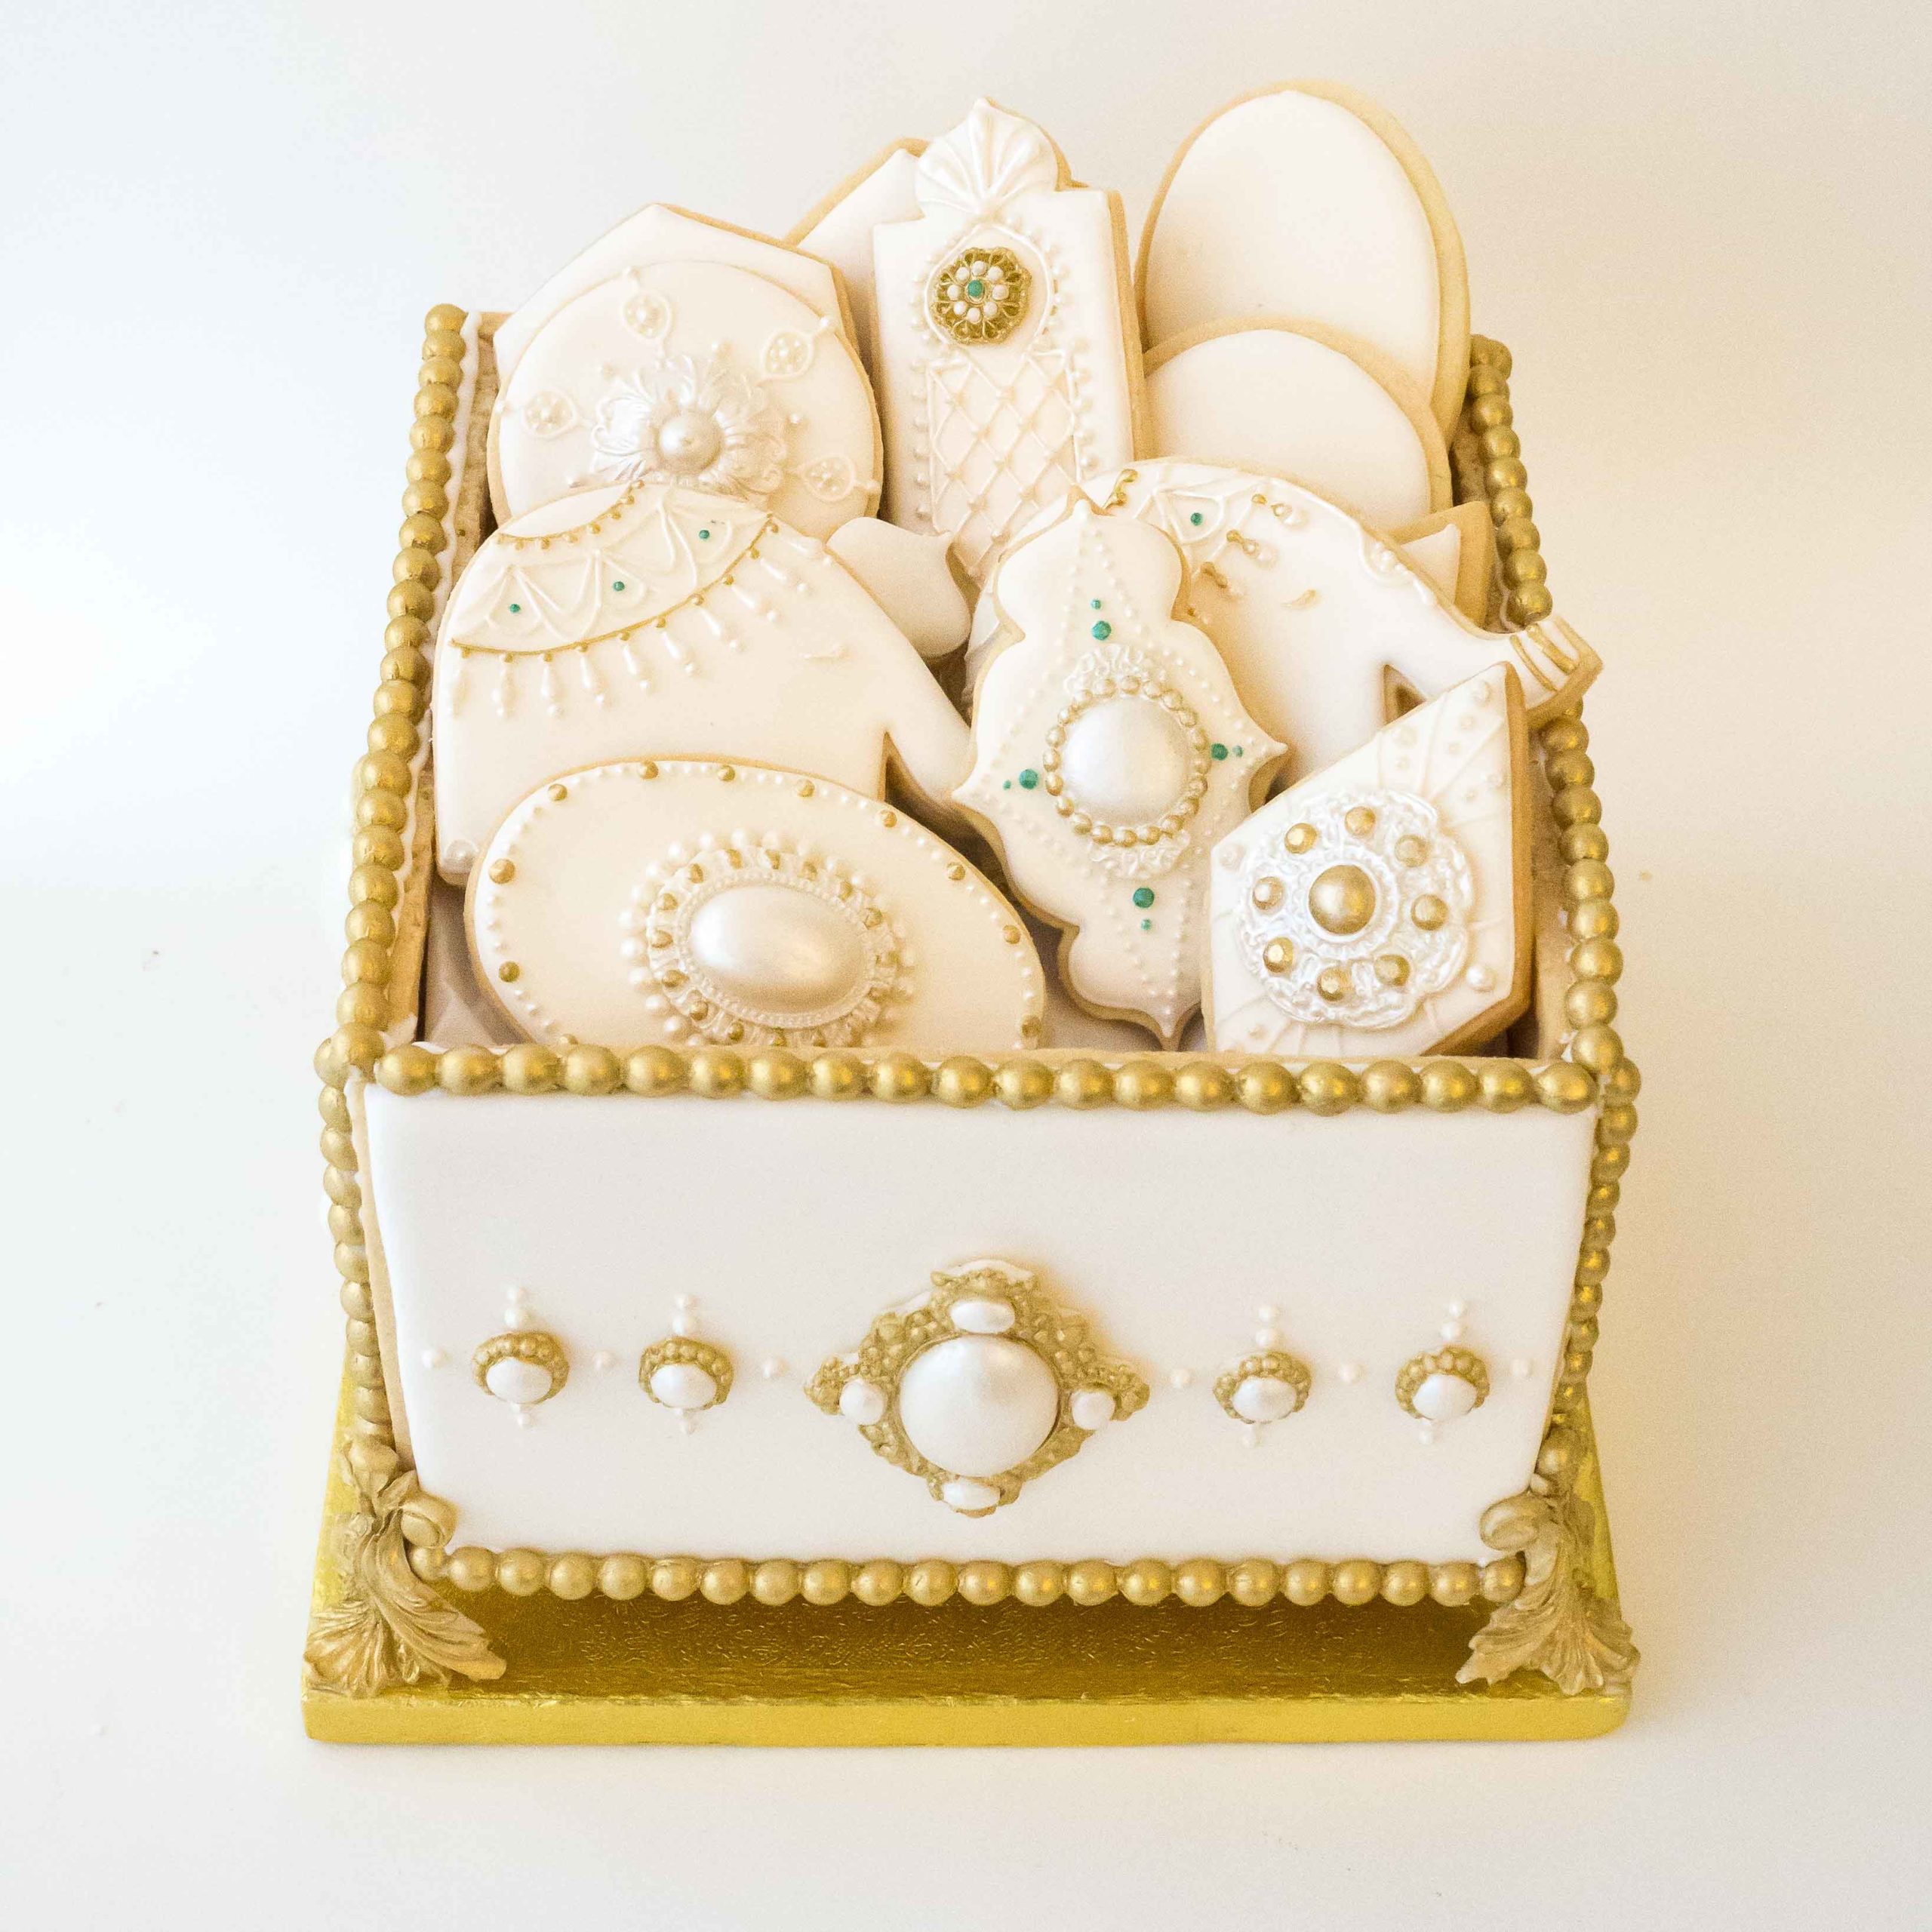 Bespoke Corporate Cookie Box by Rosalind Miller Cakes London